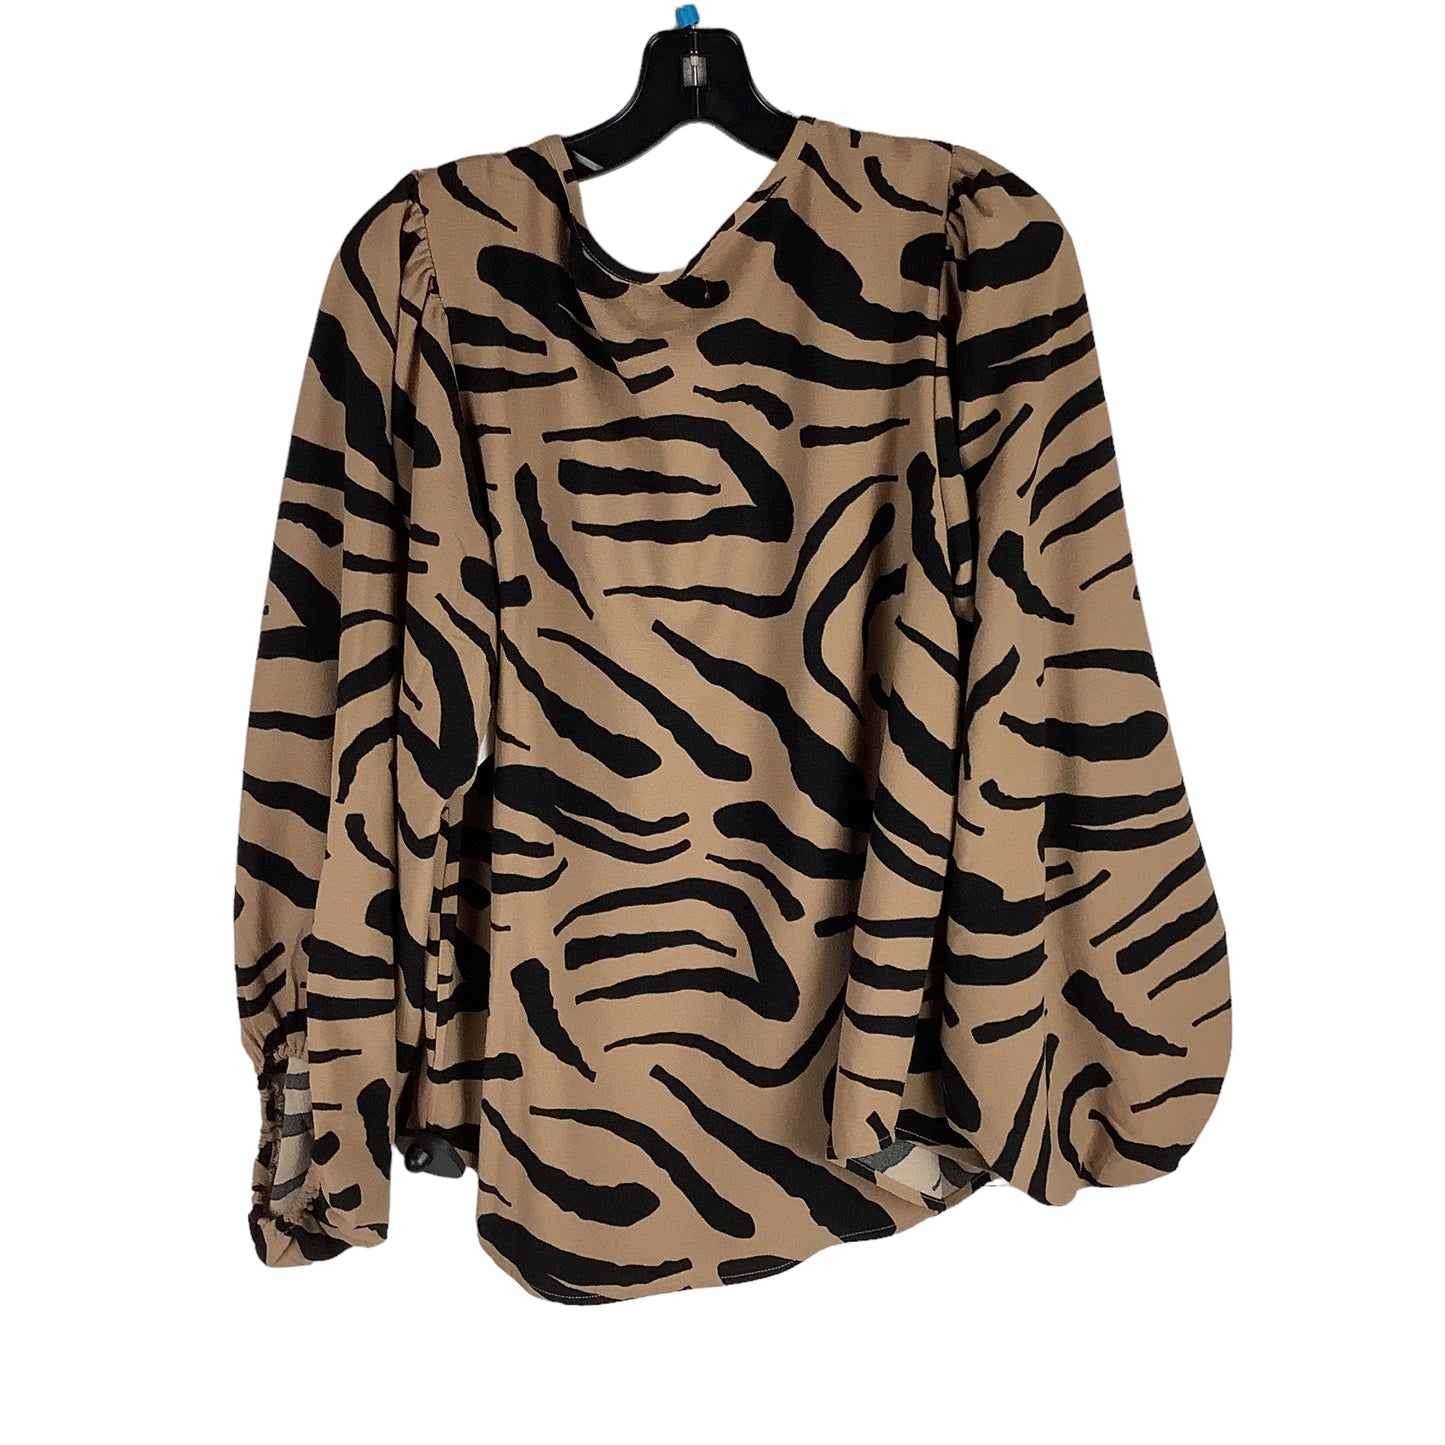 Top Long Sleeve By Mudpie  Size: M